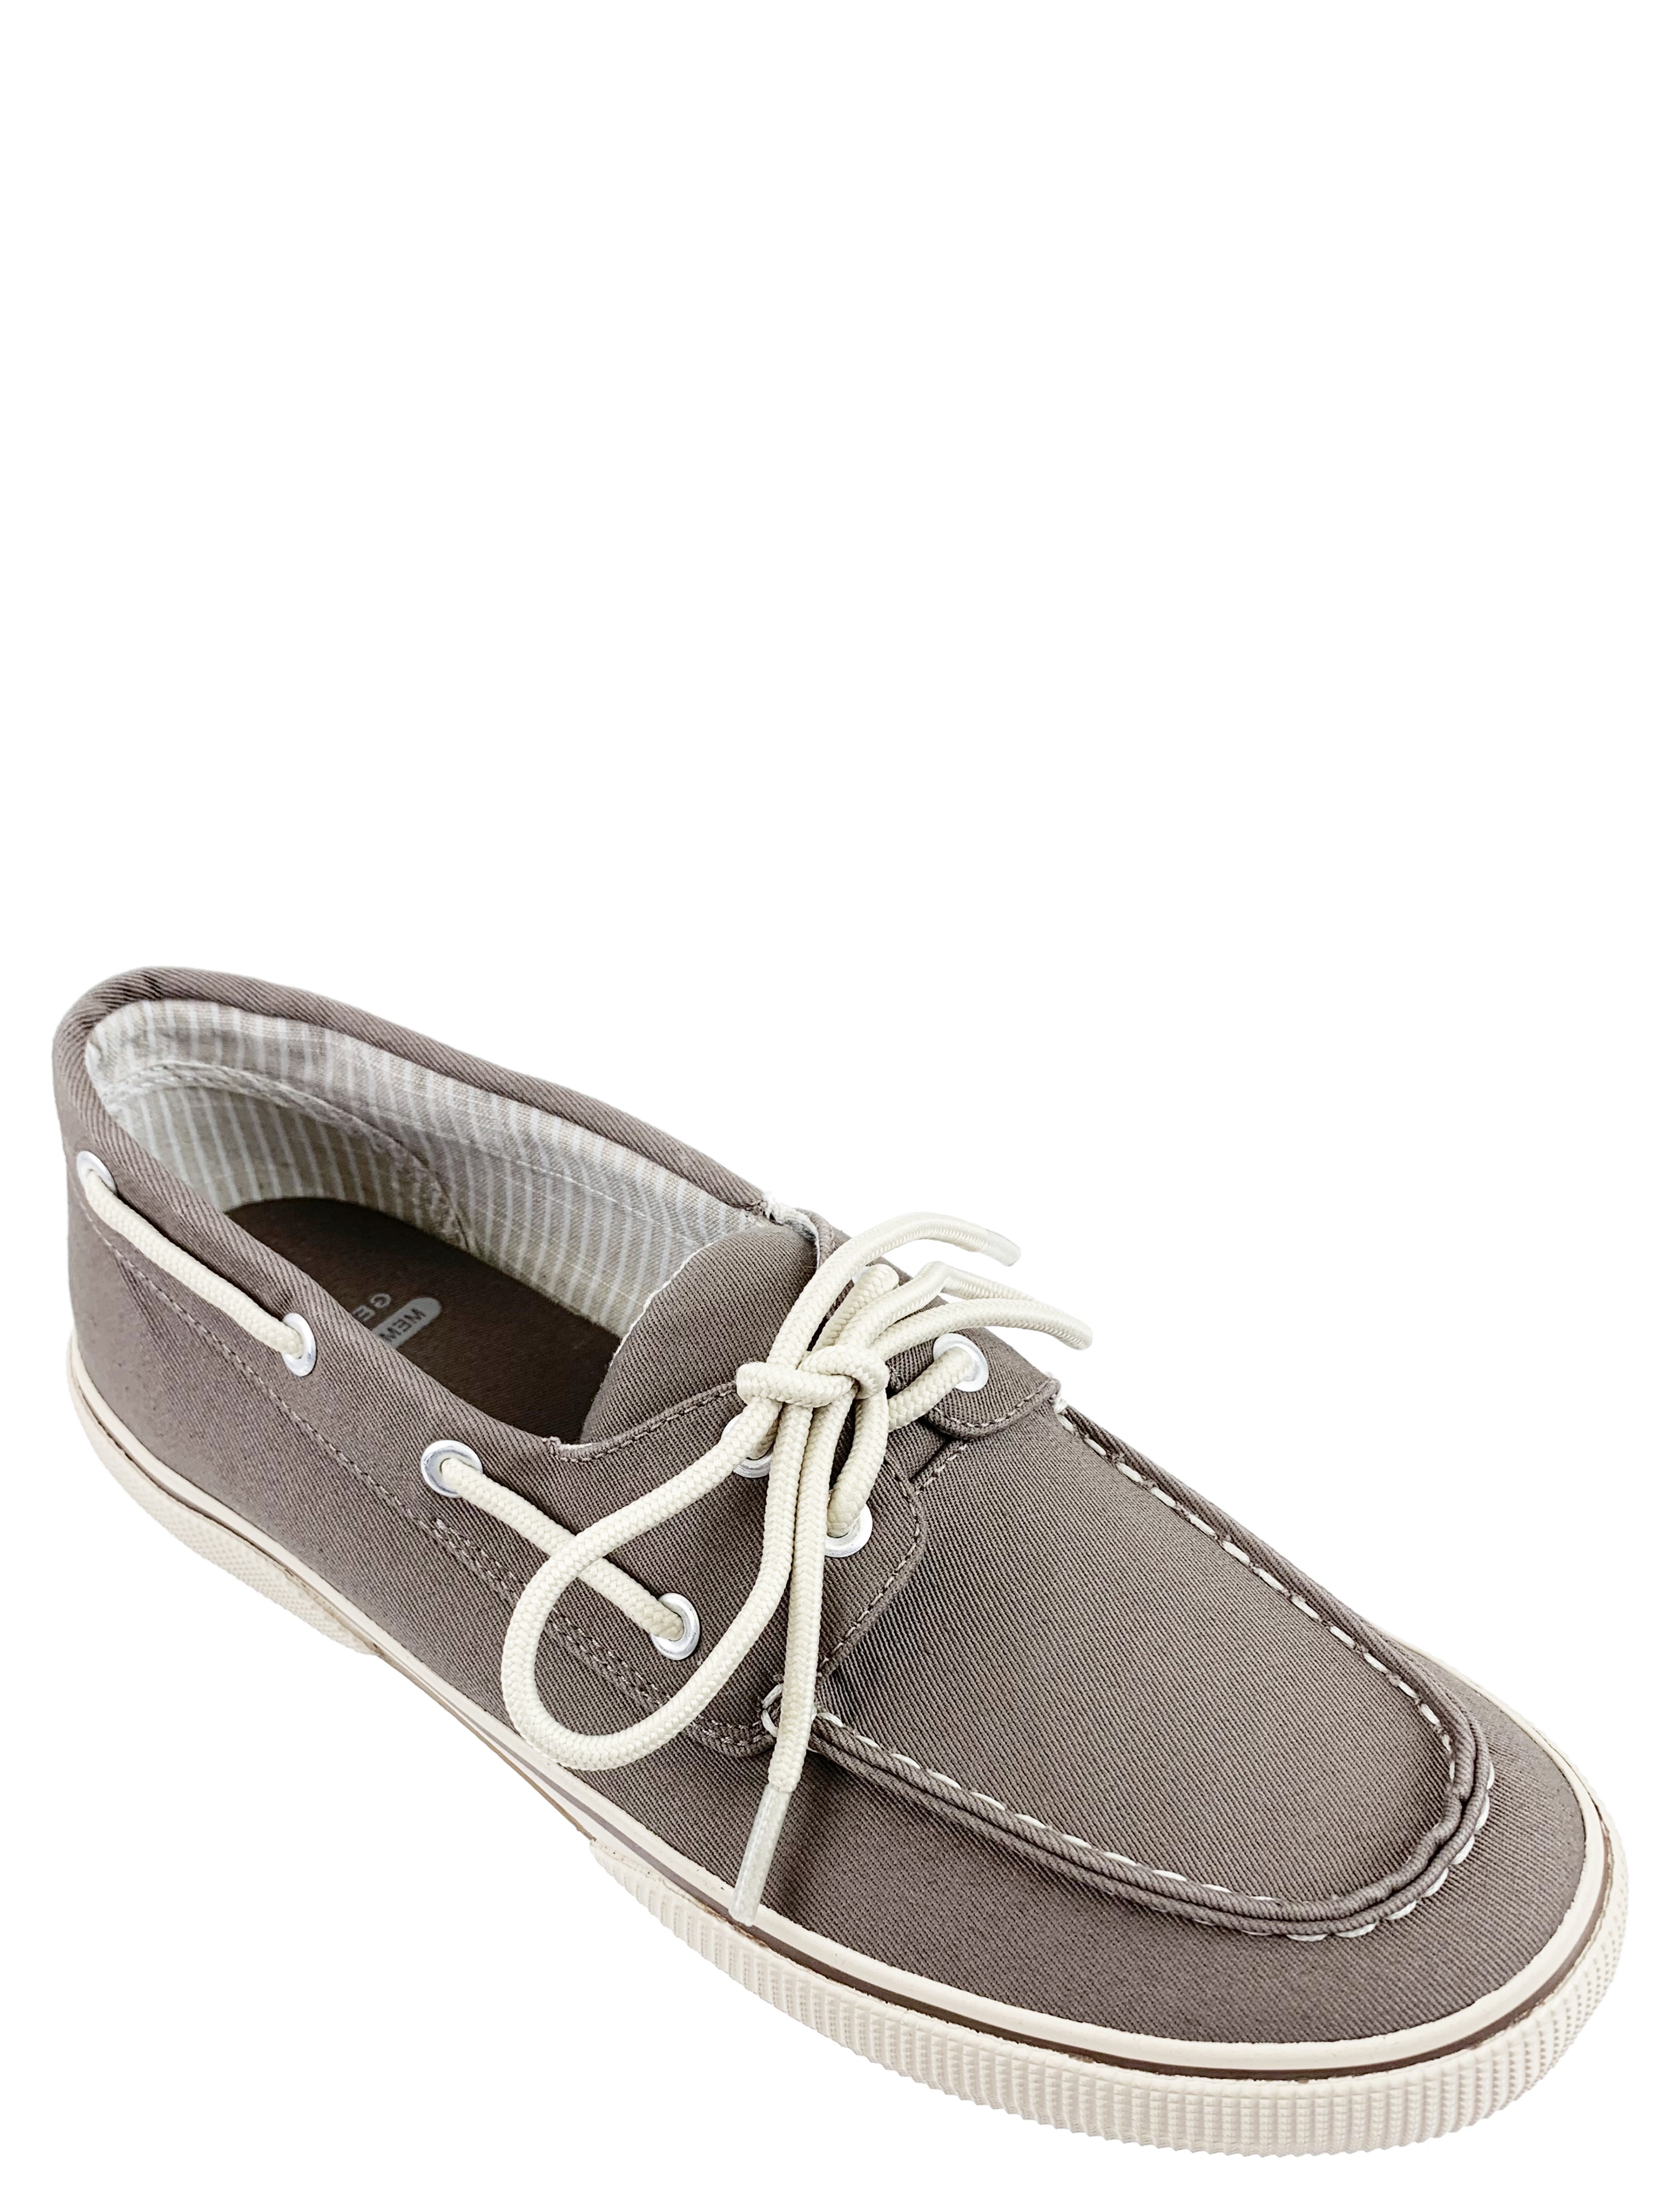 George Men's Classic Canvas Boat Shoe with Memory Foam - image 1 of 5